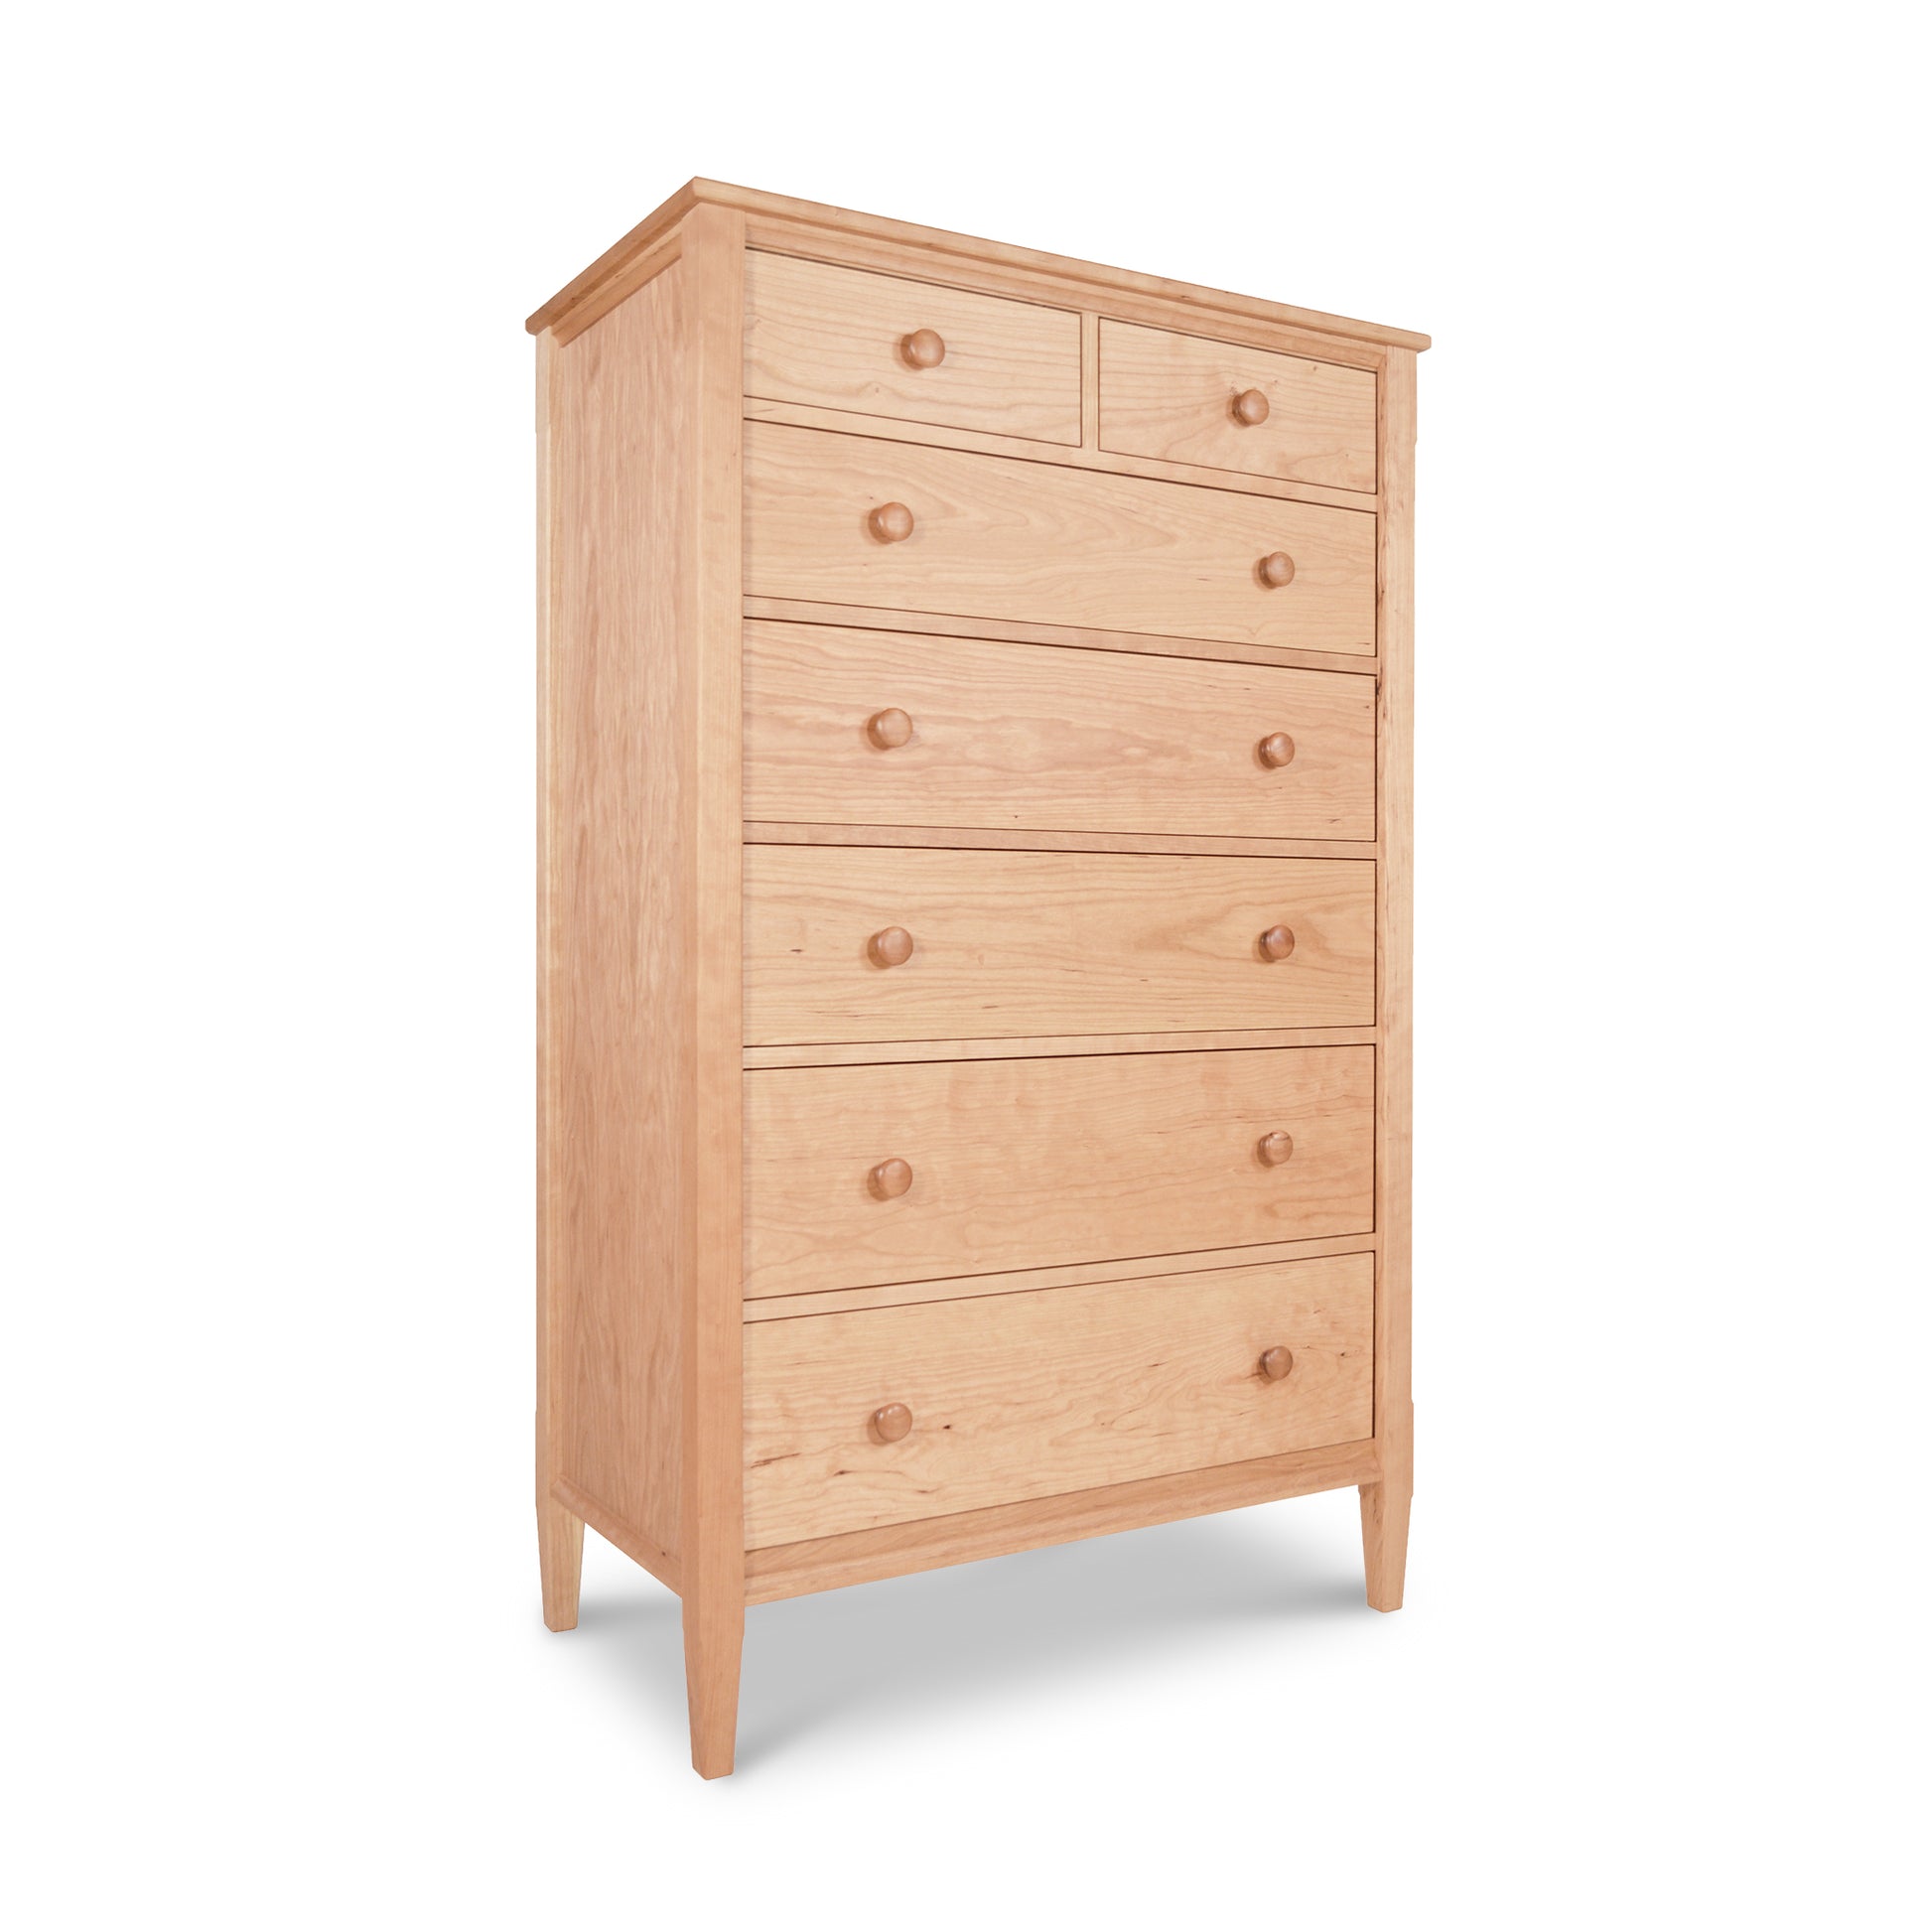 A Vermont Shaker 7-Drawer Chest by Maple Corner Woodworks, featuring a simple design with rounded handles, standing against a white background.